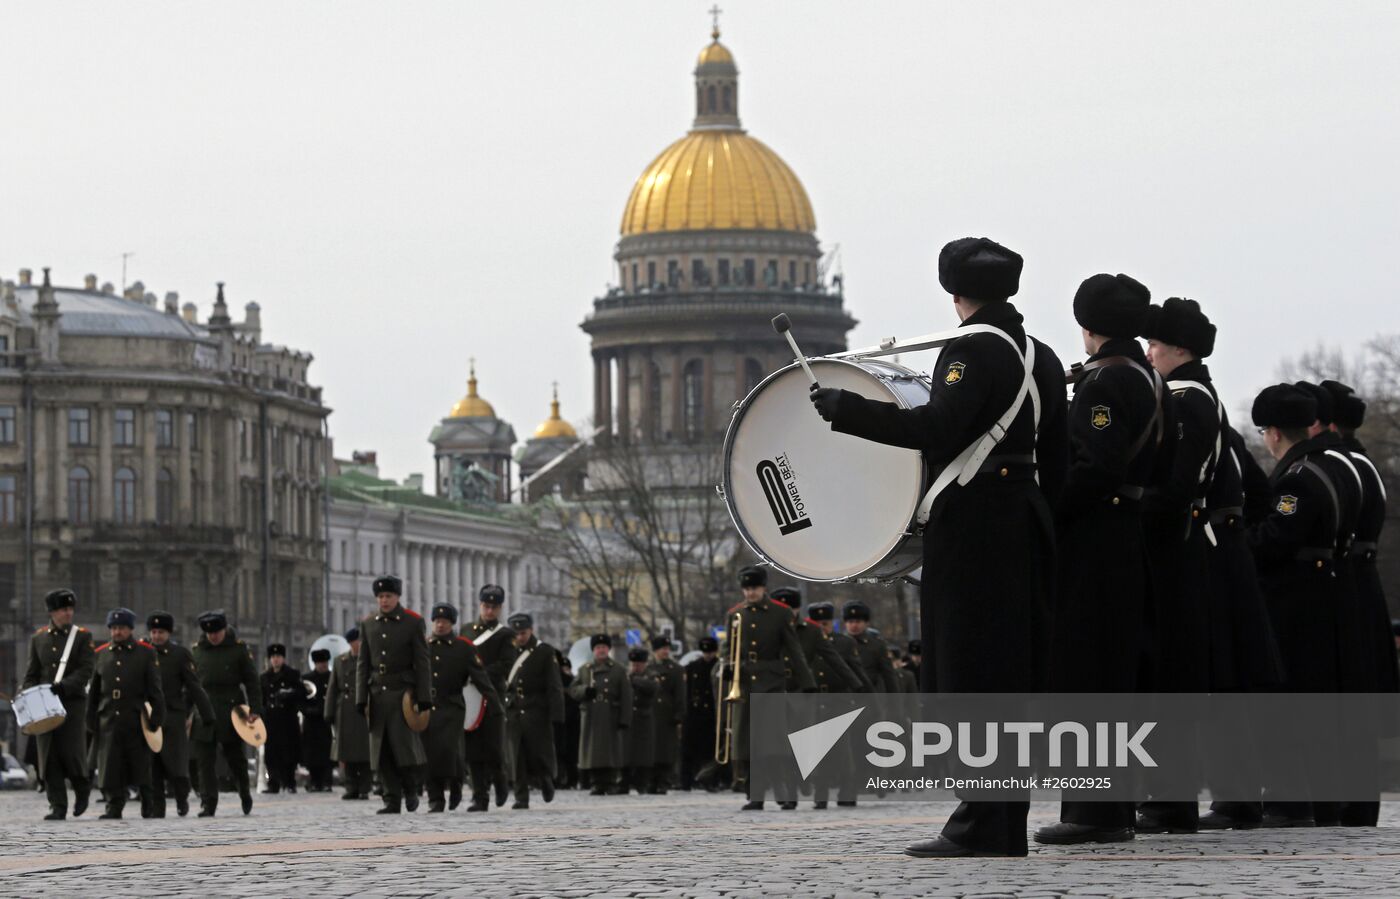 Military band rehearsal in St. Petersburg for celebrations of 70th anniversary of the Victory